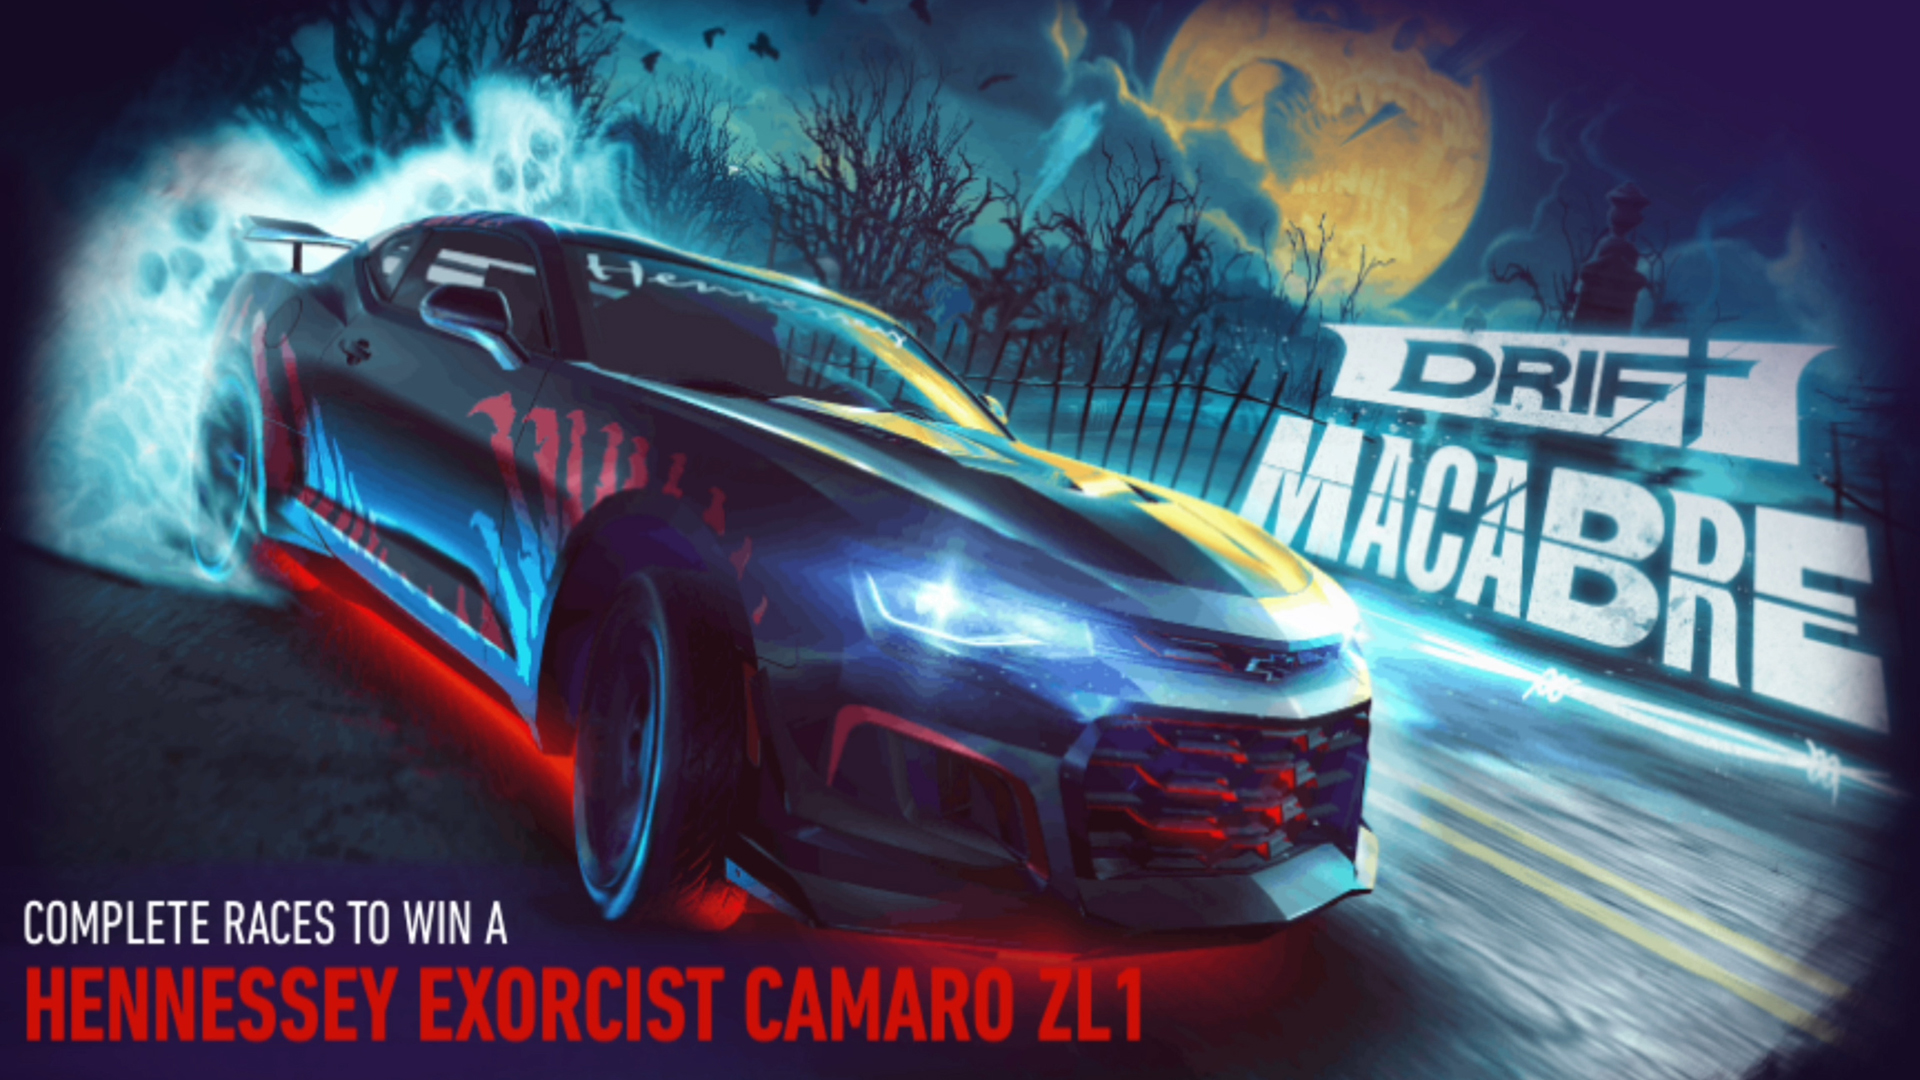 Hennessey Exorcist Camaro ZL1 Drift Macabre NFS No Limits FULL EVENT